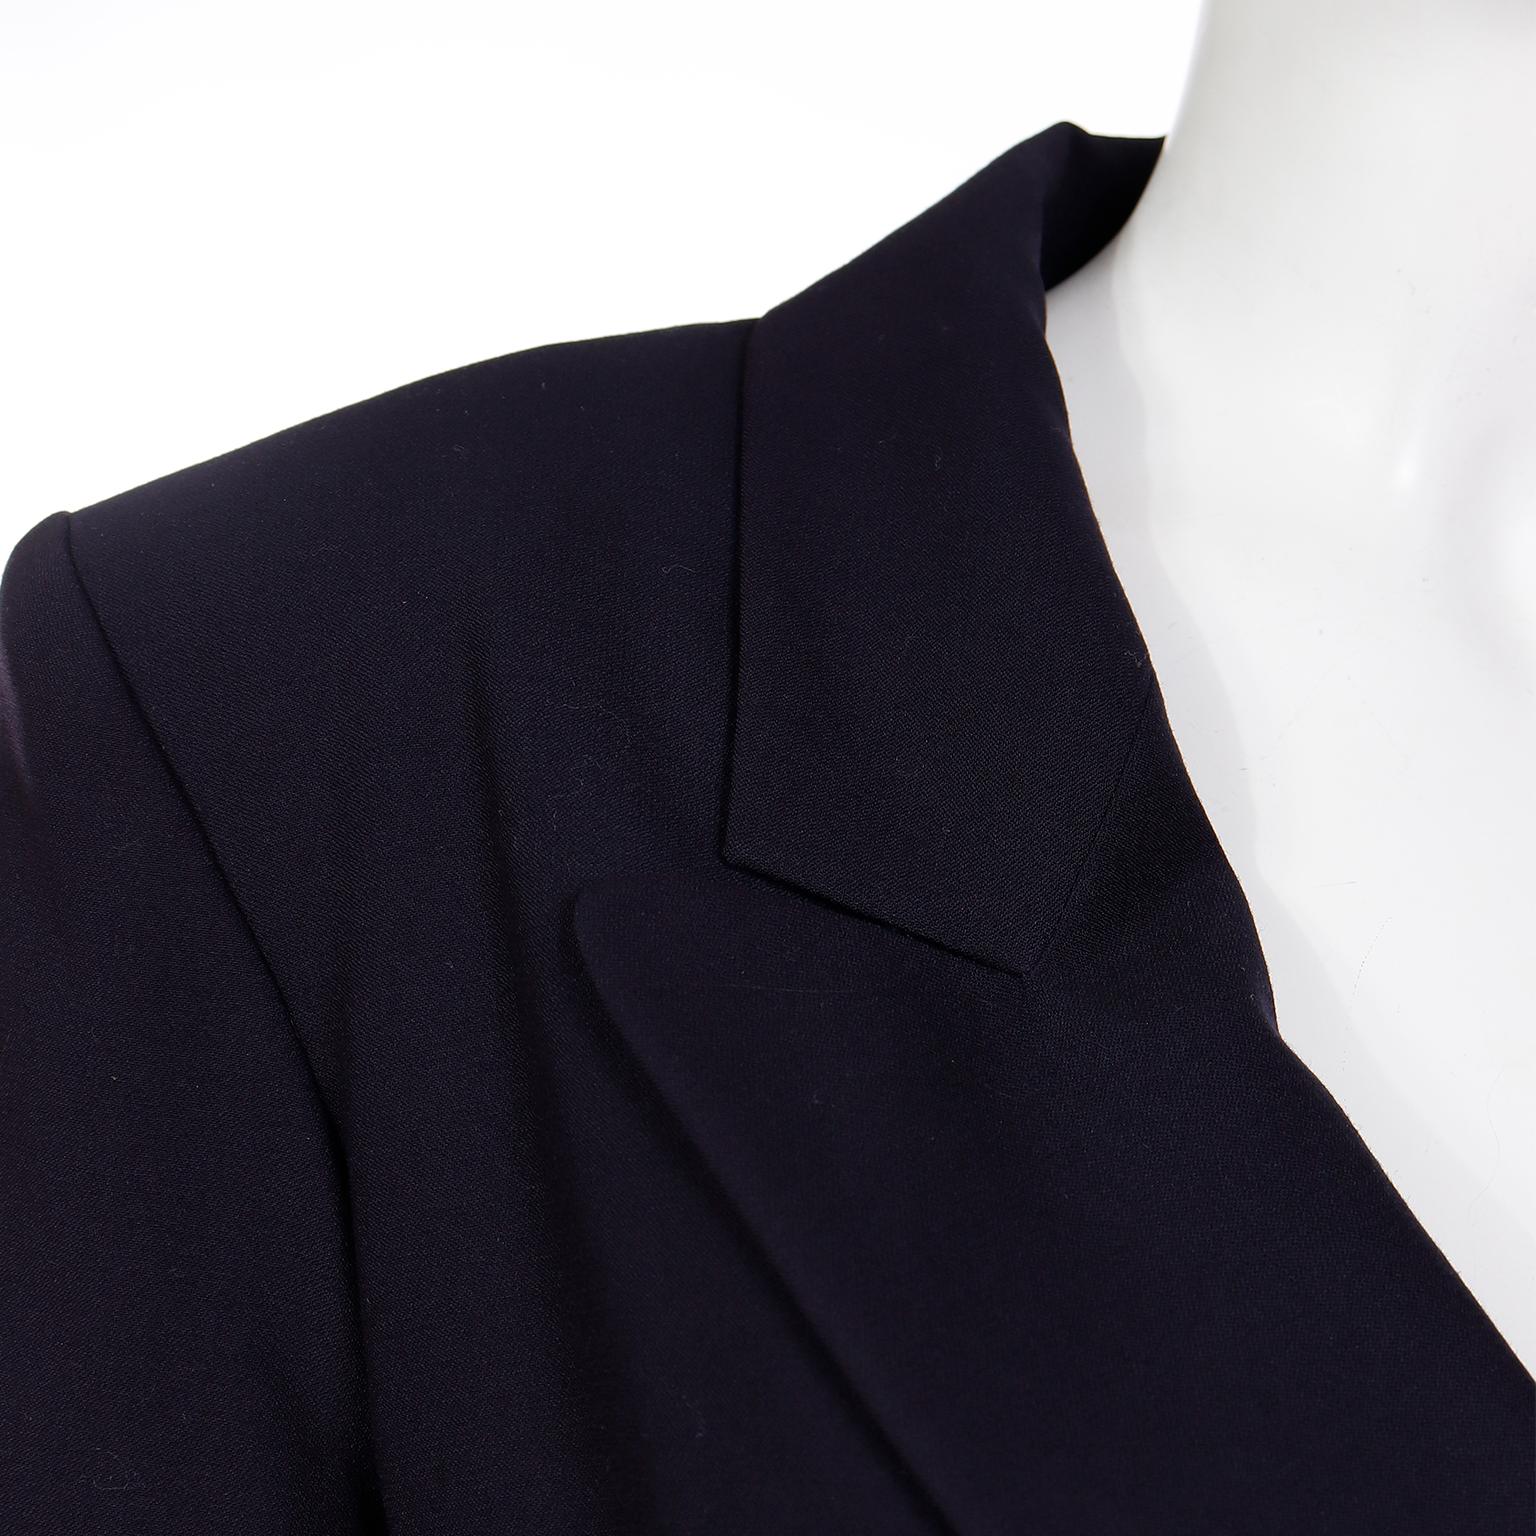 Yves Saint Laurent 1991 Navy Blue Wool Blazer Jacket w Faux Gold Coin Buttons For Sale 3